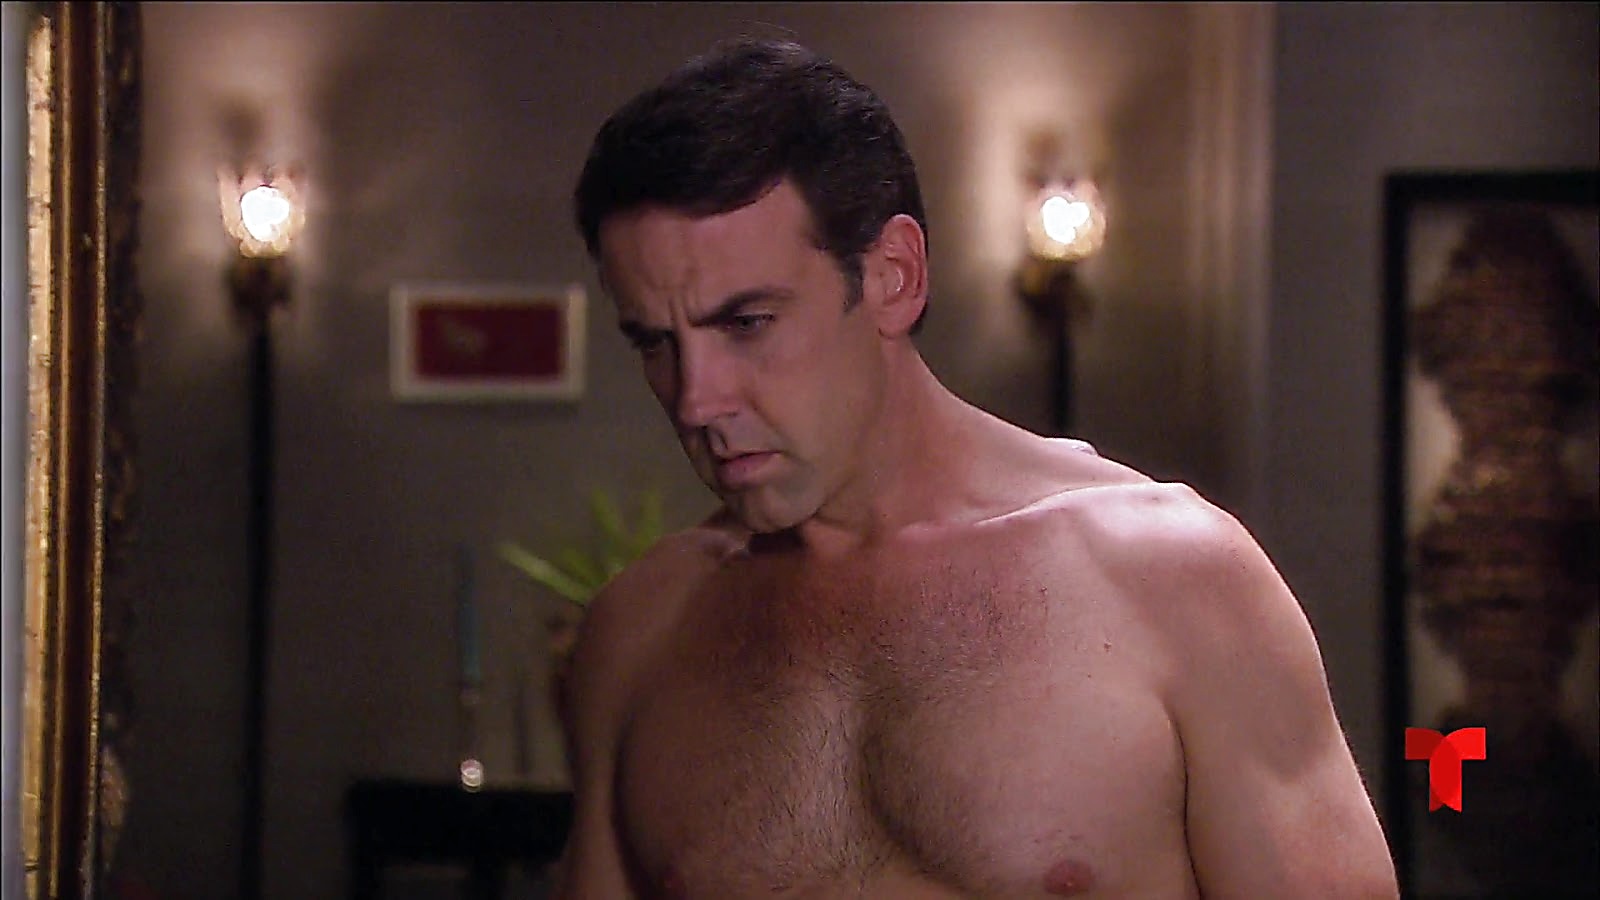 Athletic Body: Carlos Ponce Shirtless.